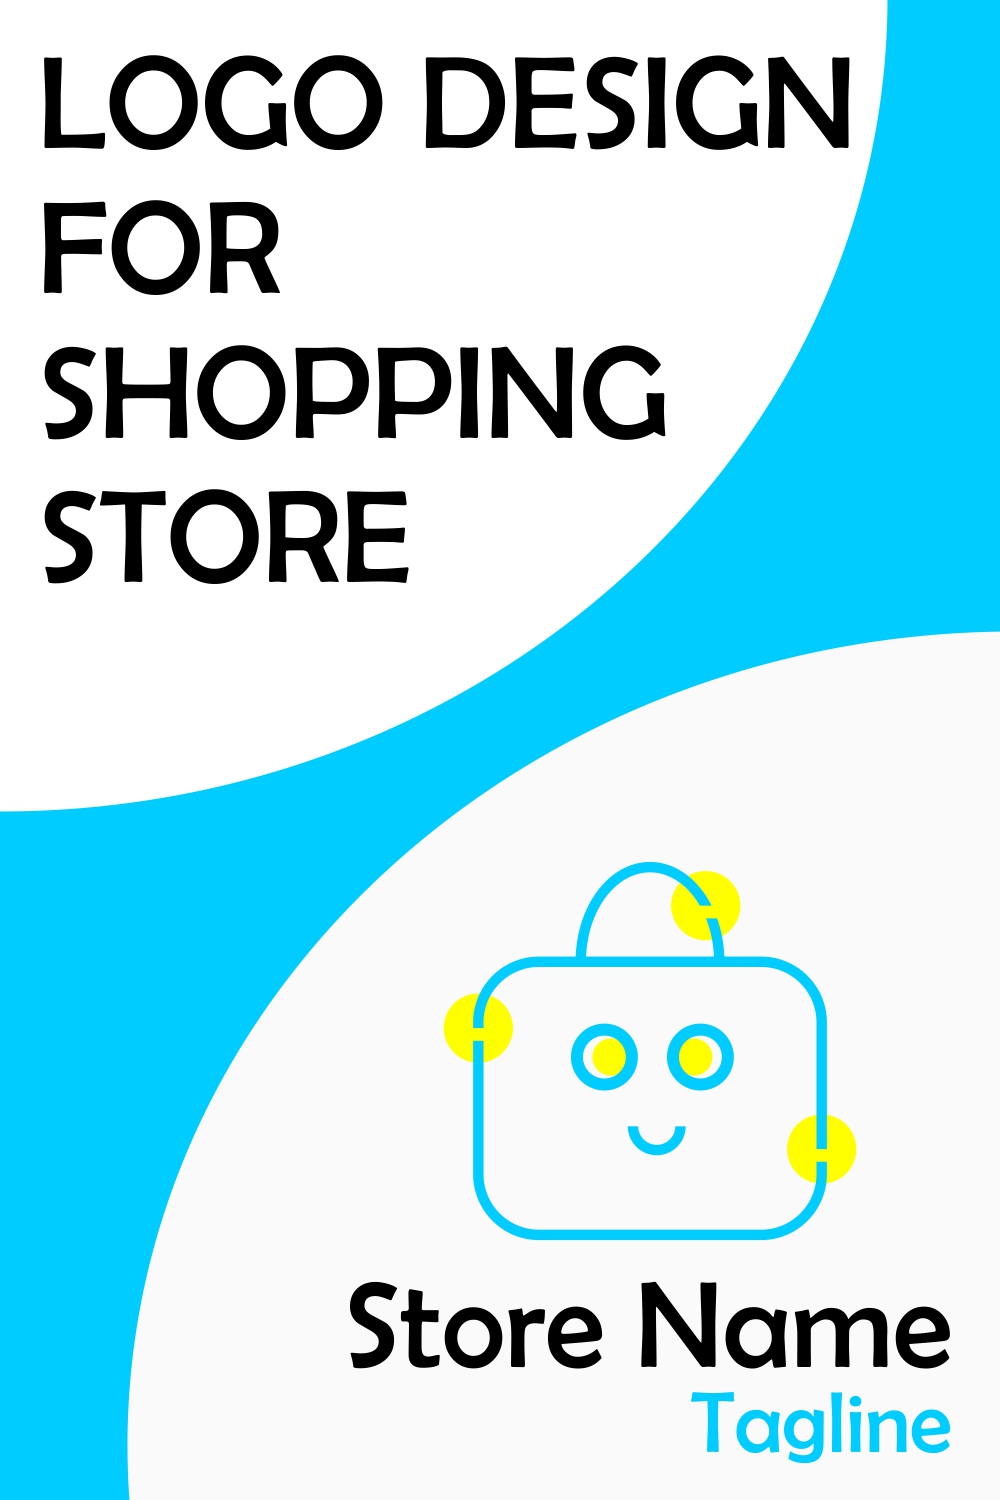 Minimalist Shopping and Store logo pinterest preview image.